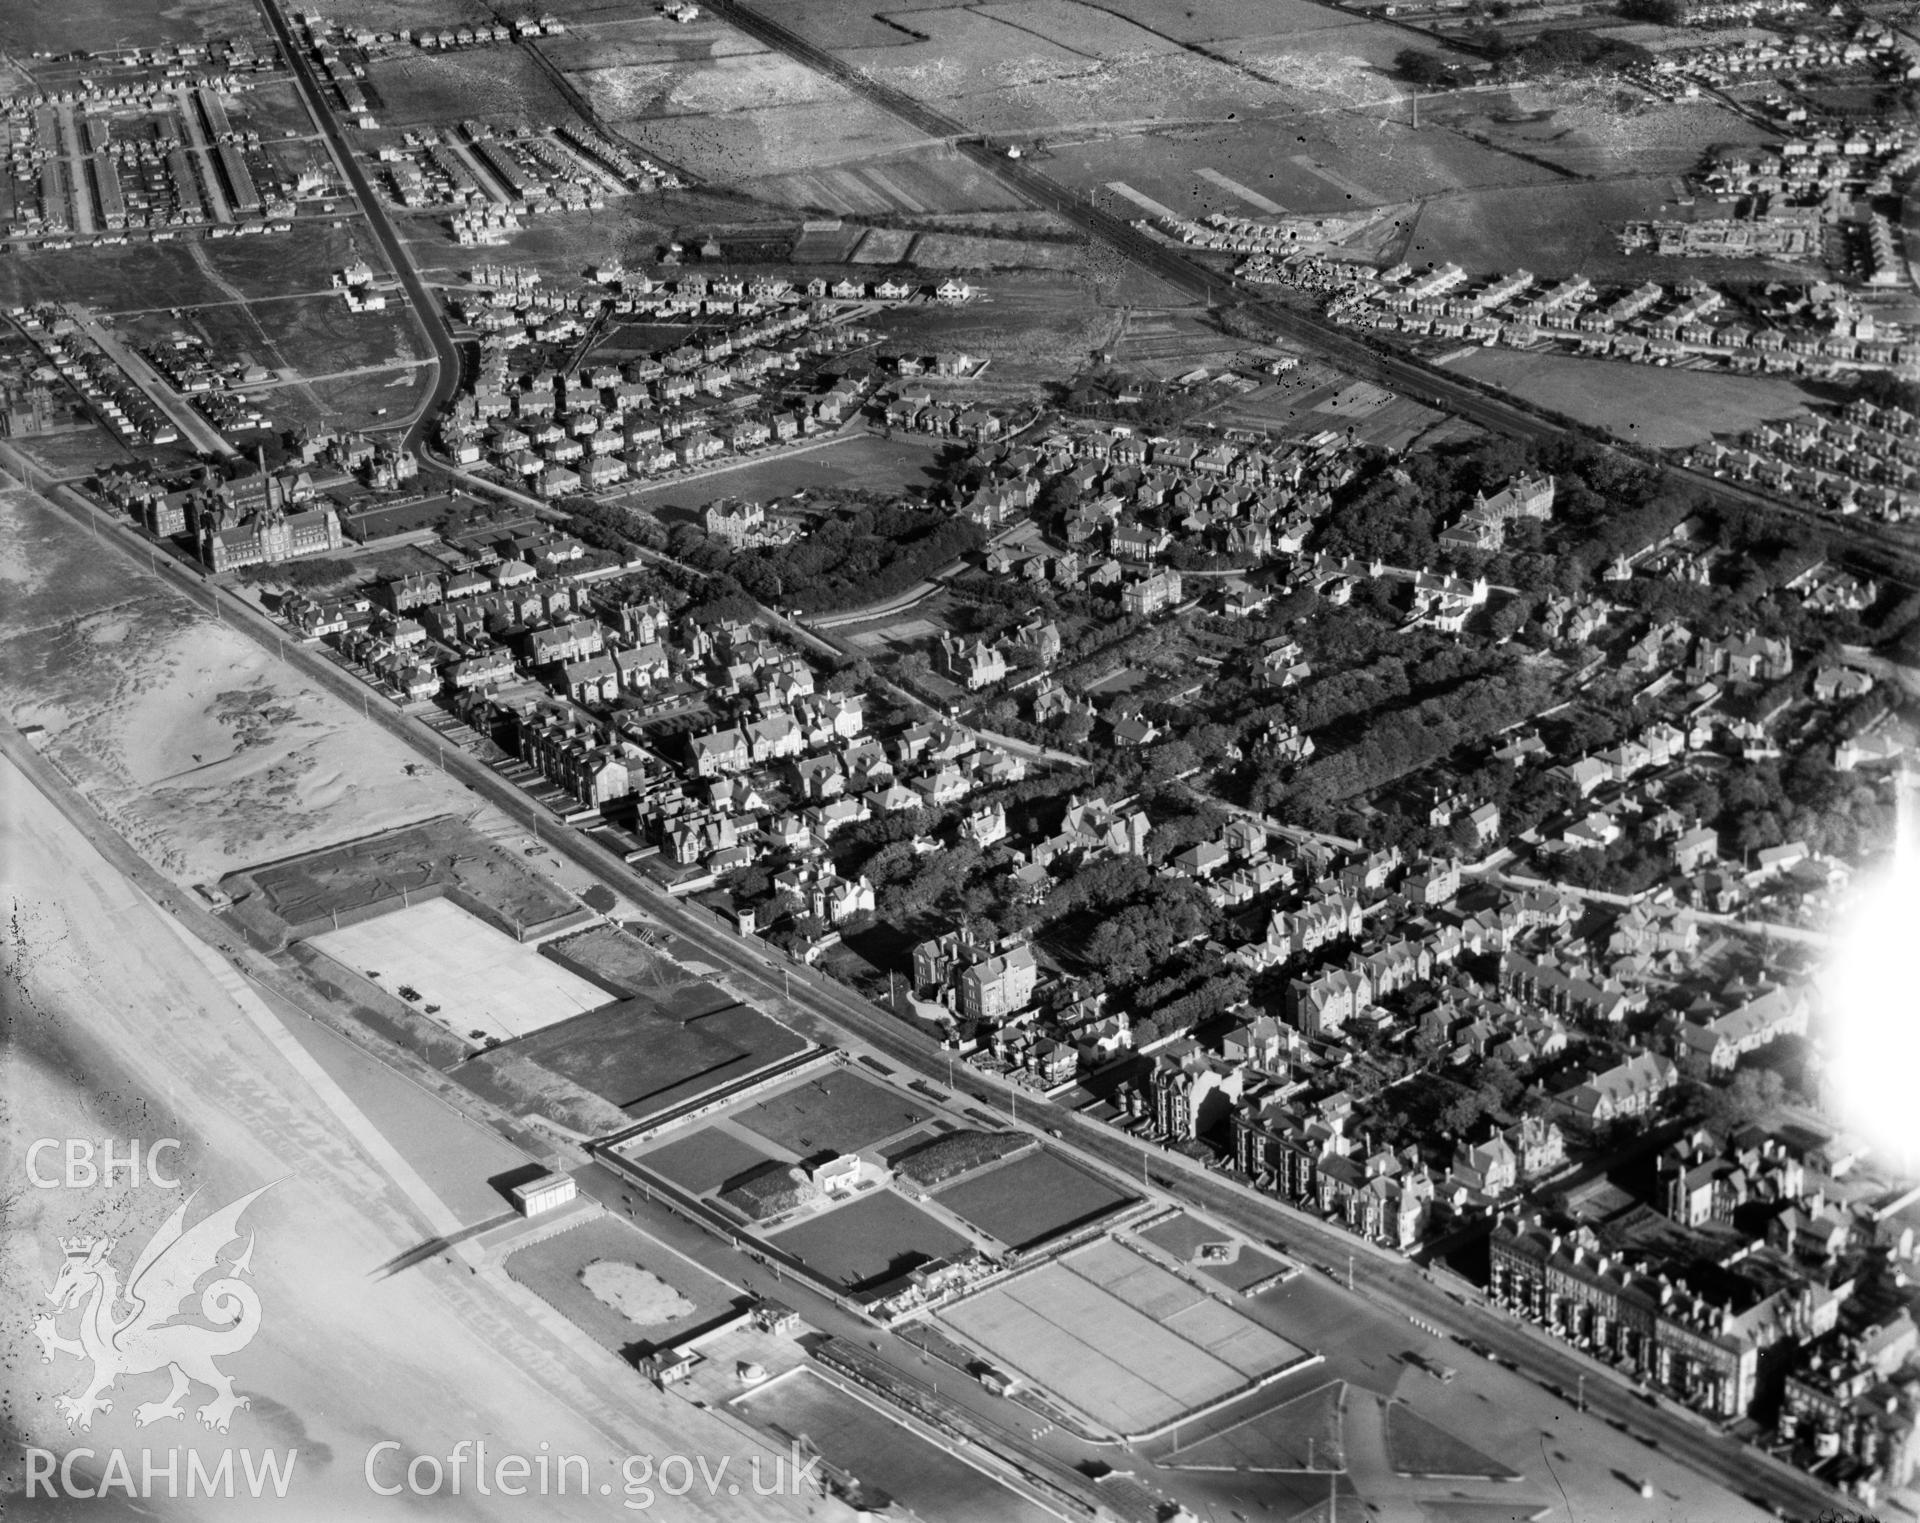 View of Rhyl showing recreation grounds on seafront, oblique aerial view. 5?x4? black and white glass plate negative.